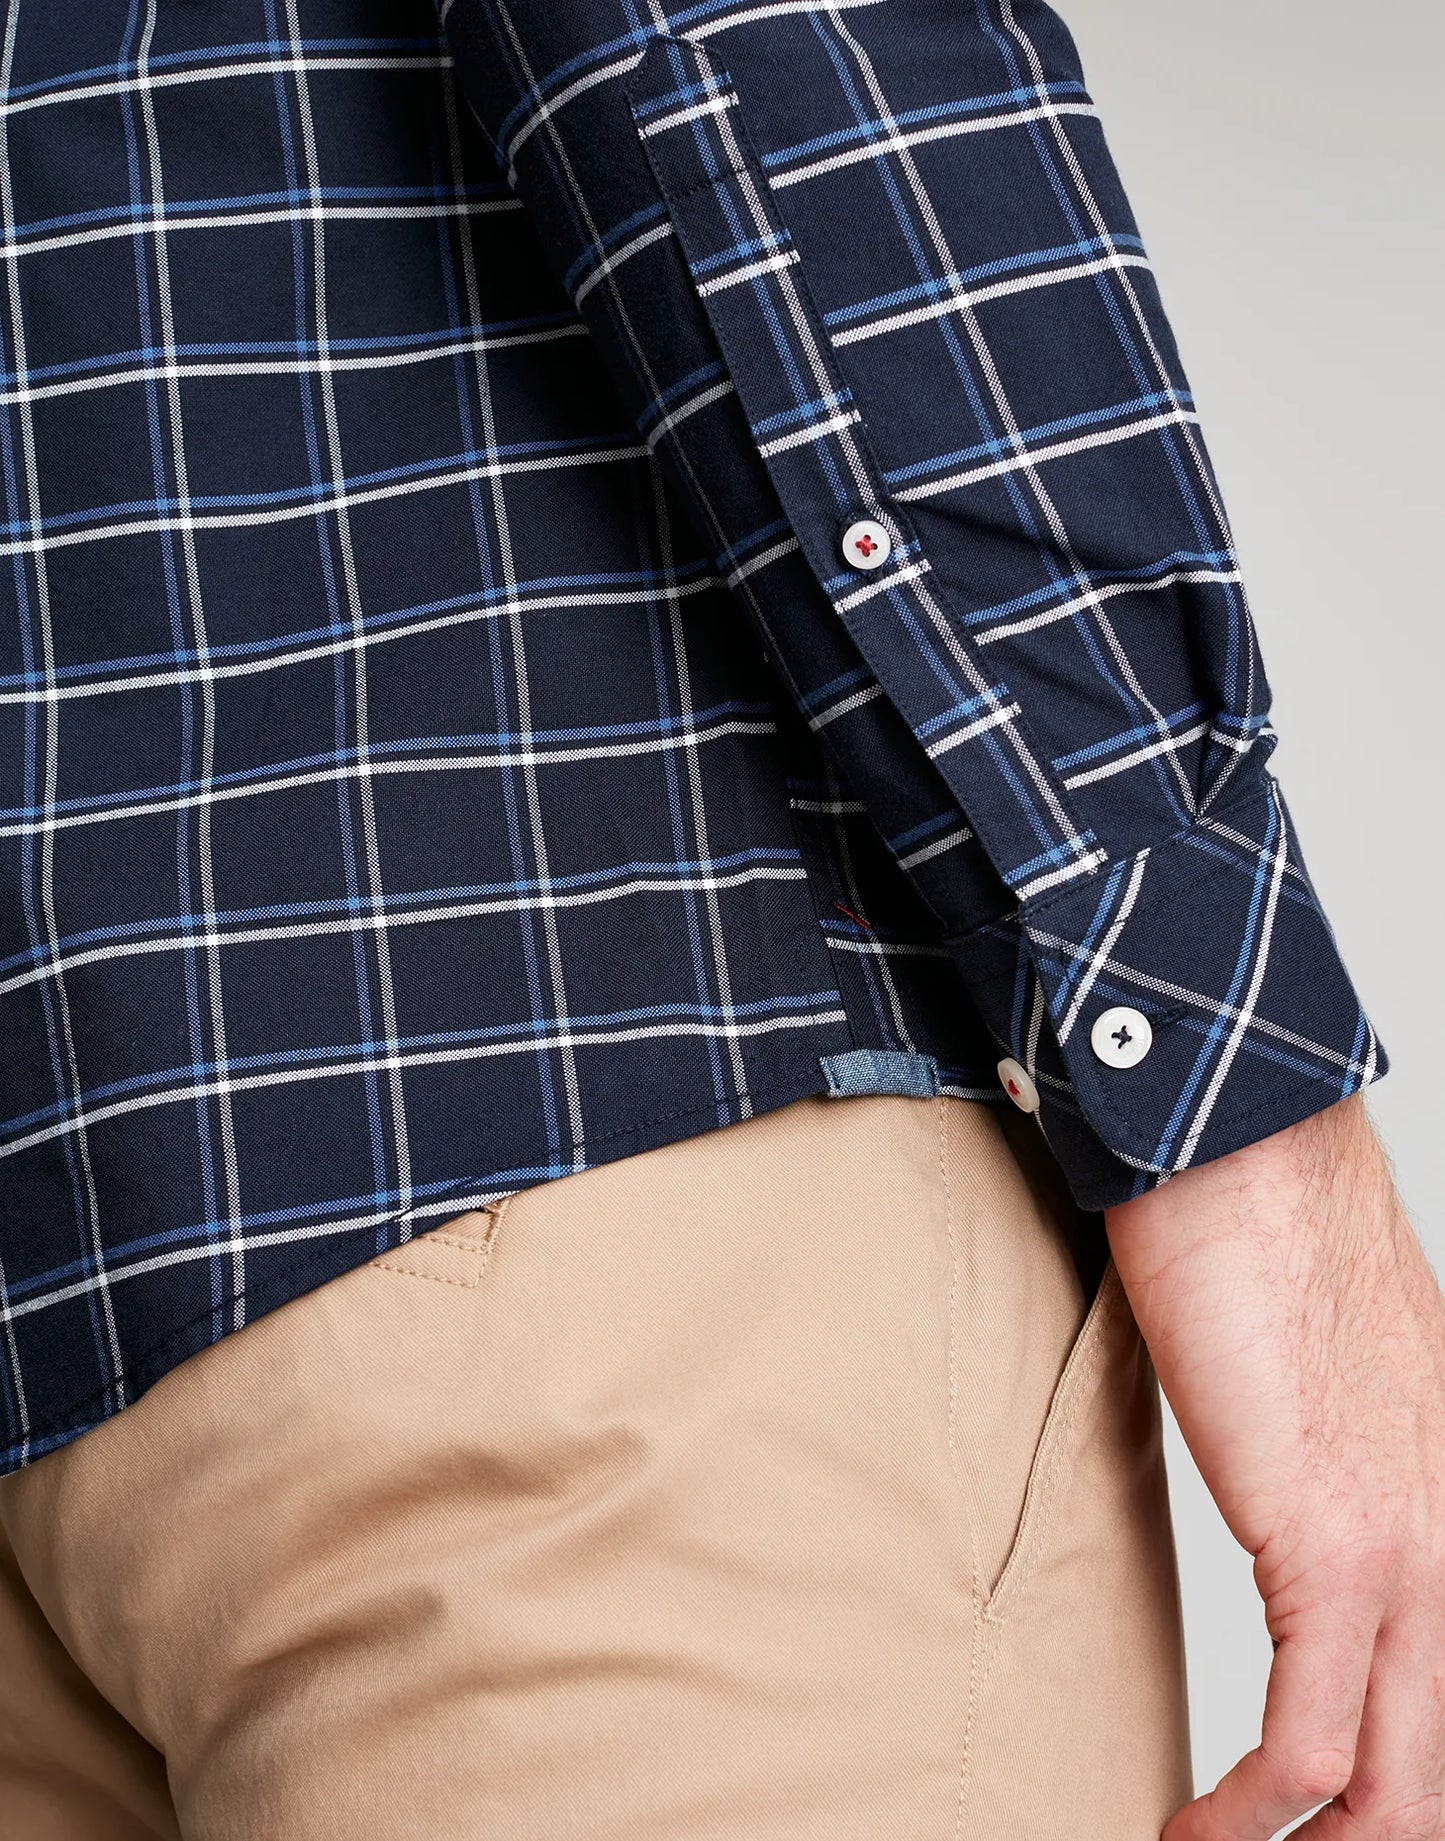 Welford Classic Fit Check Shirt - Navy Blue Check